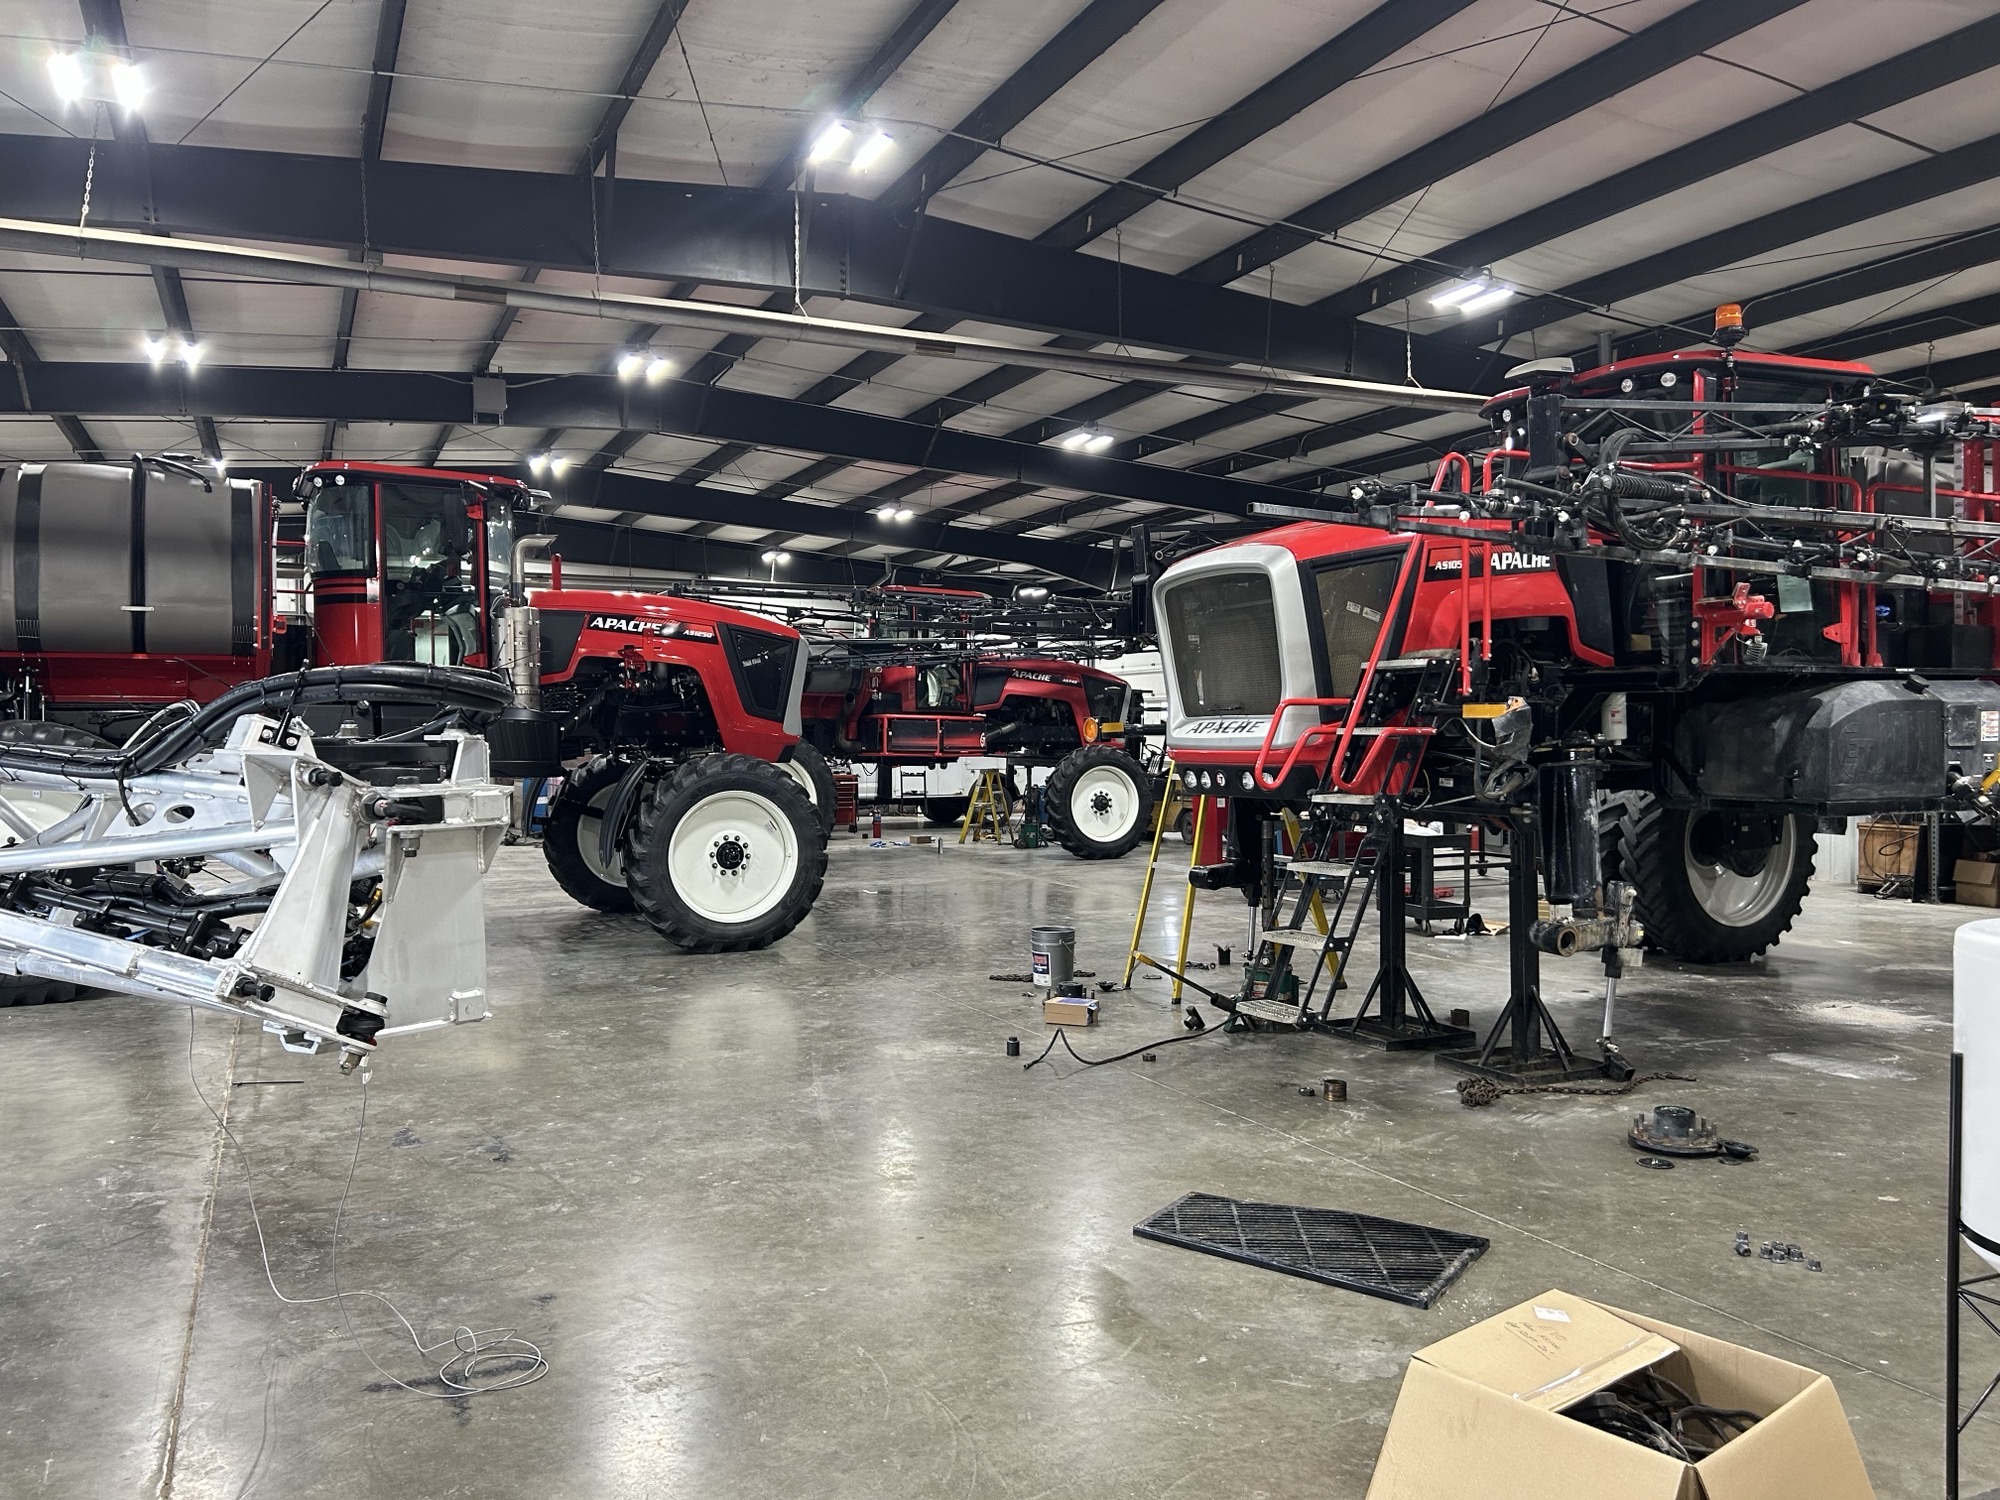 Warehouse of apache sprayers being serviced